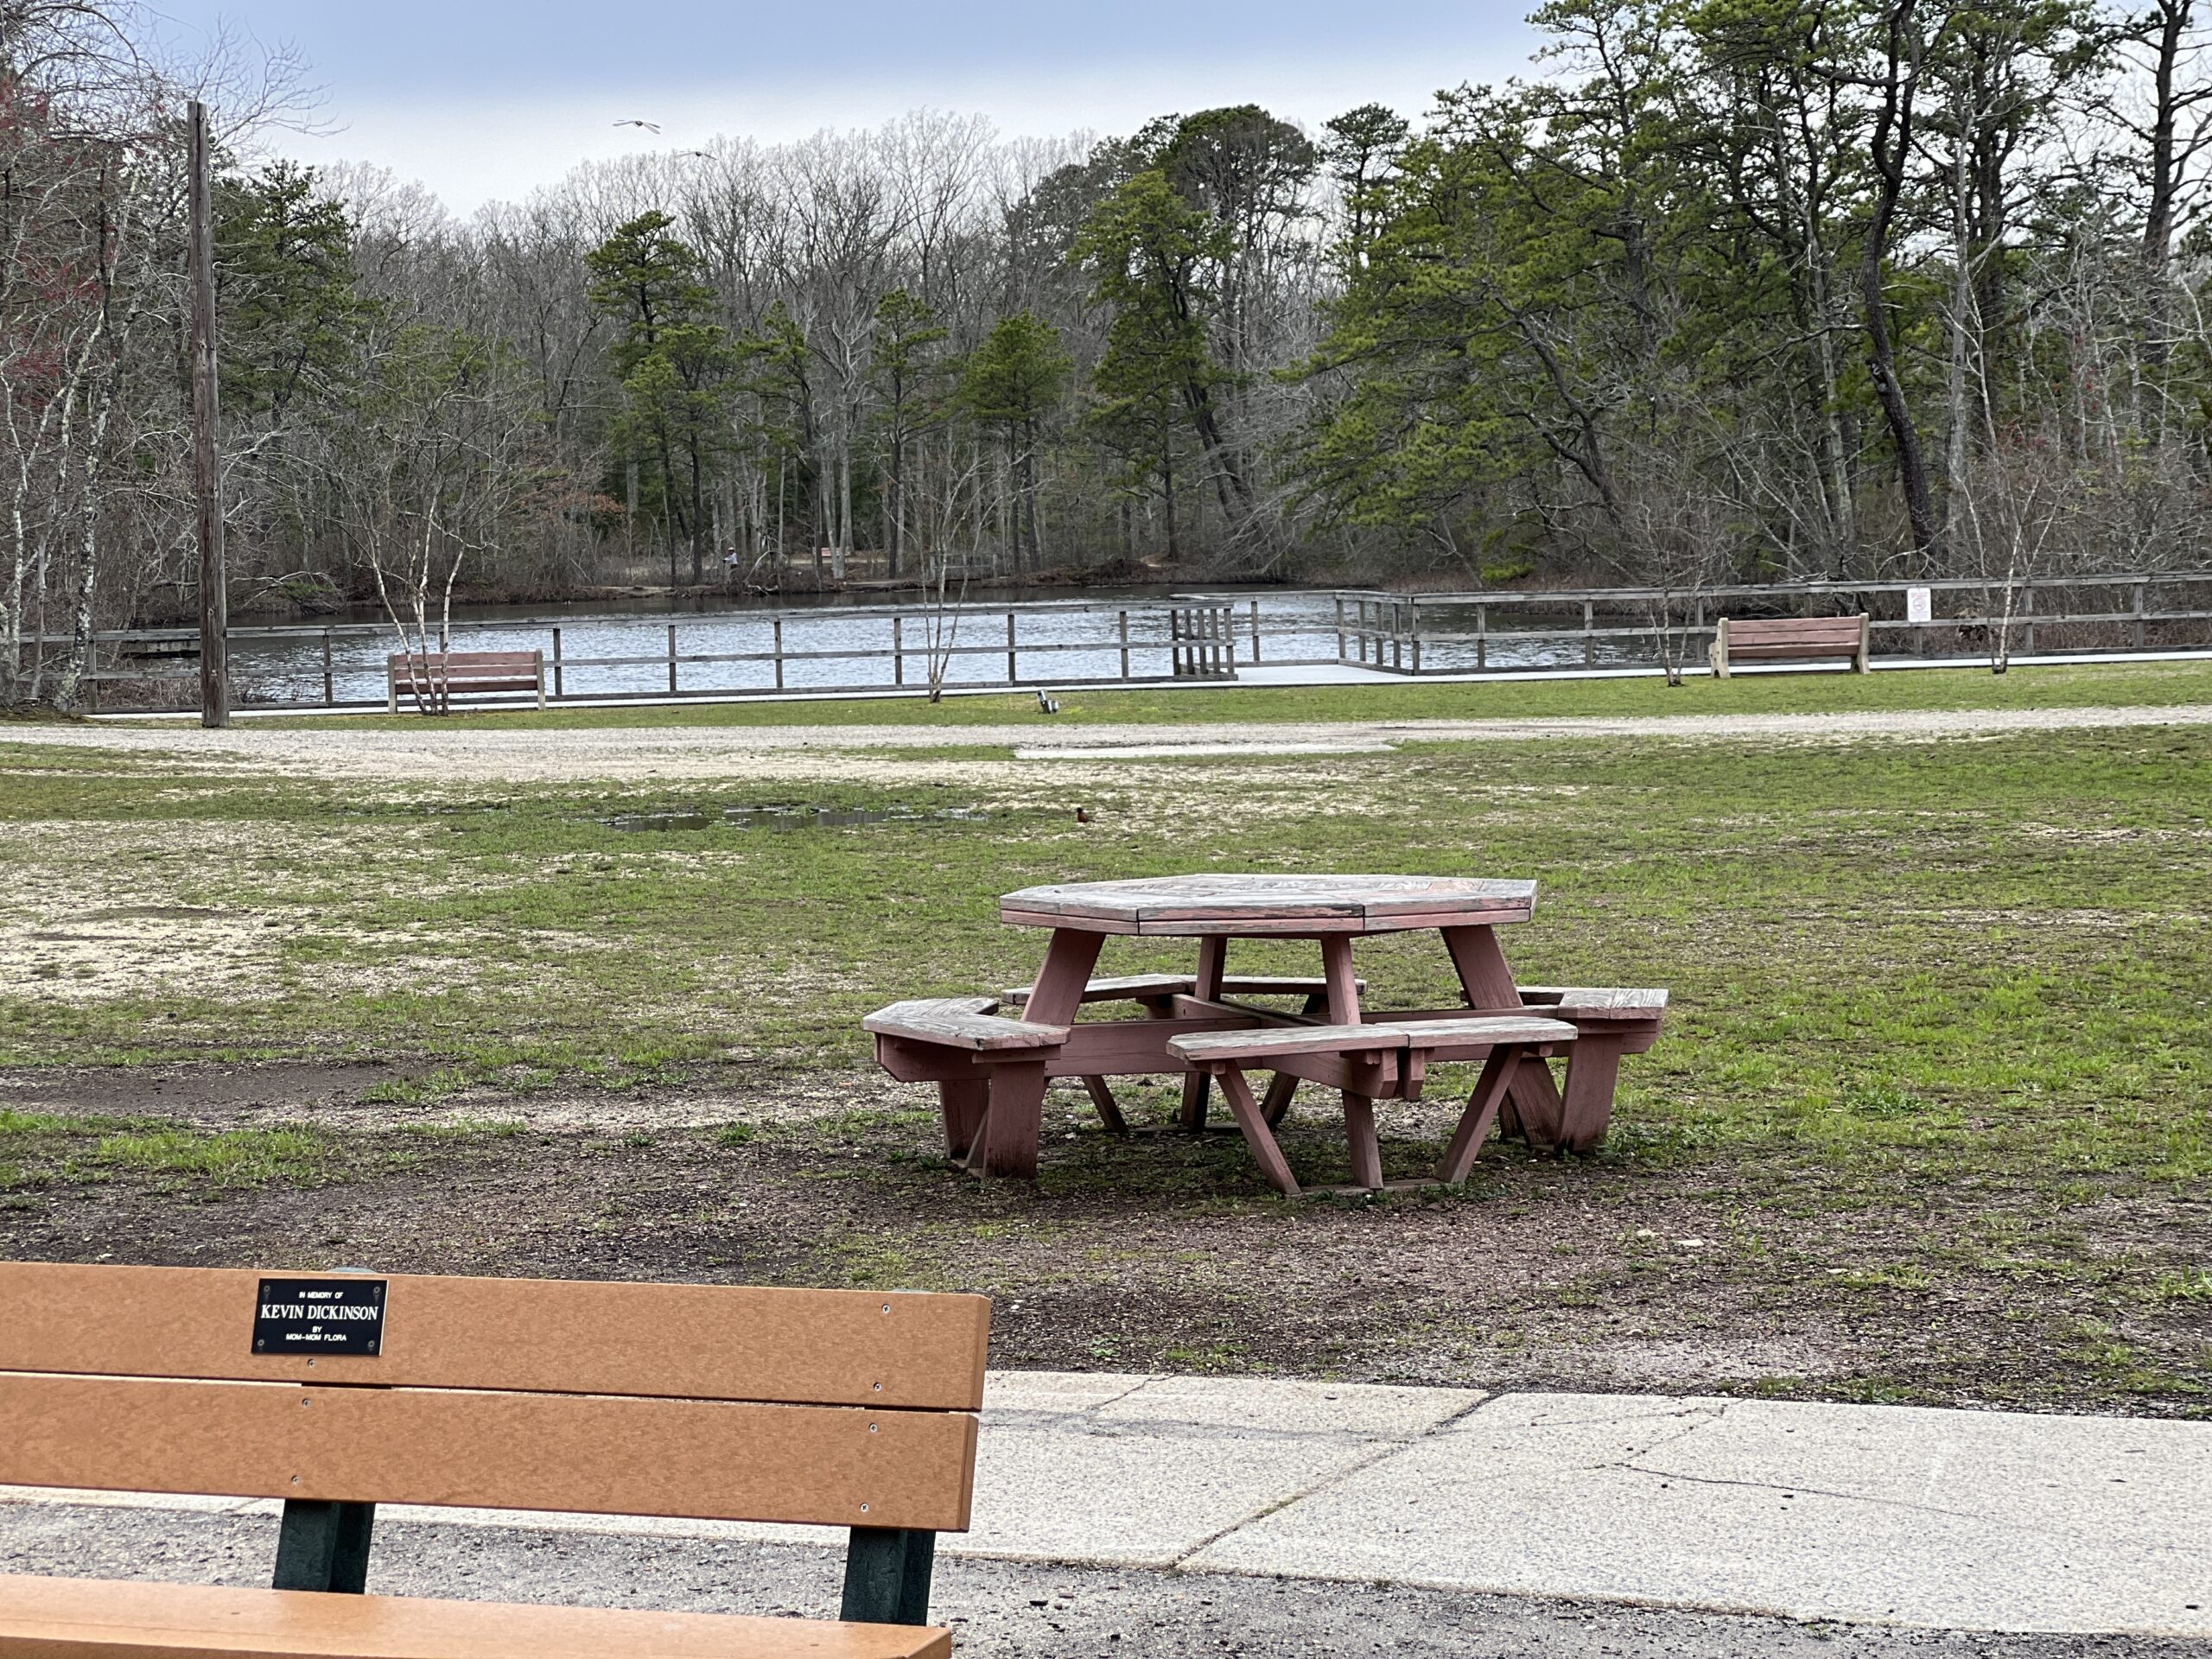 Picnic tables at Birch Grove Park Playground in Northfield NJ overlooking the pond WIDE image